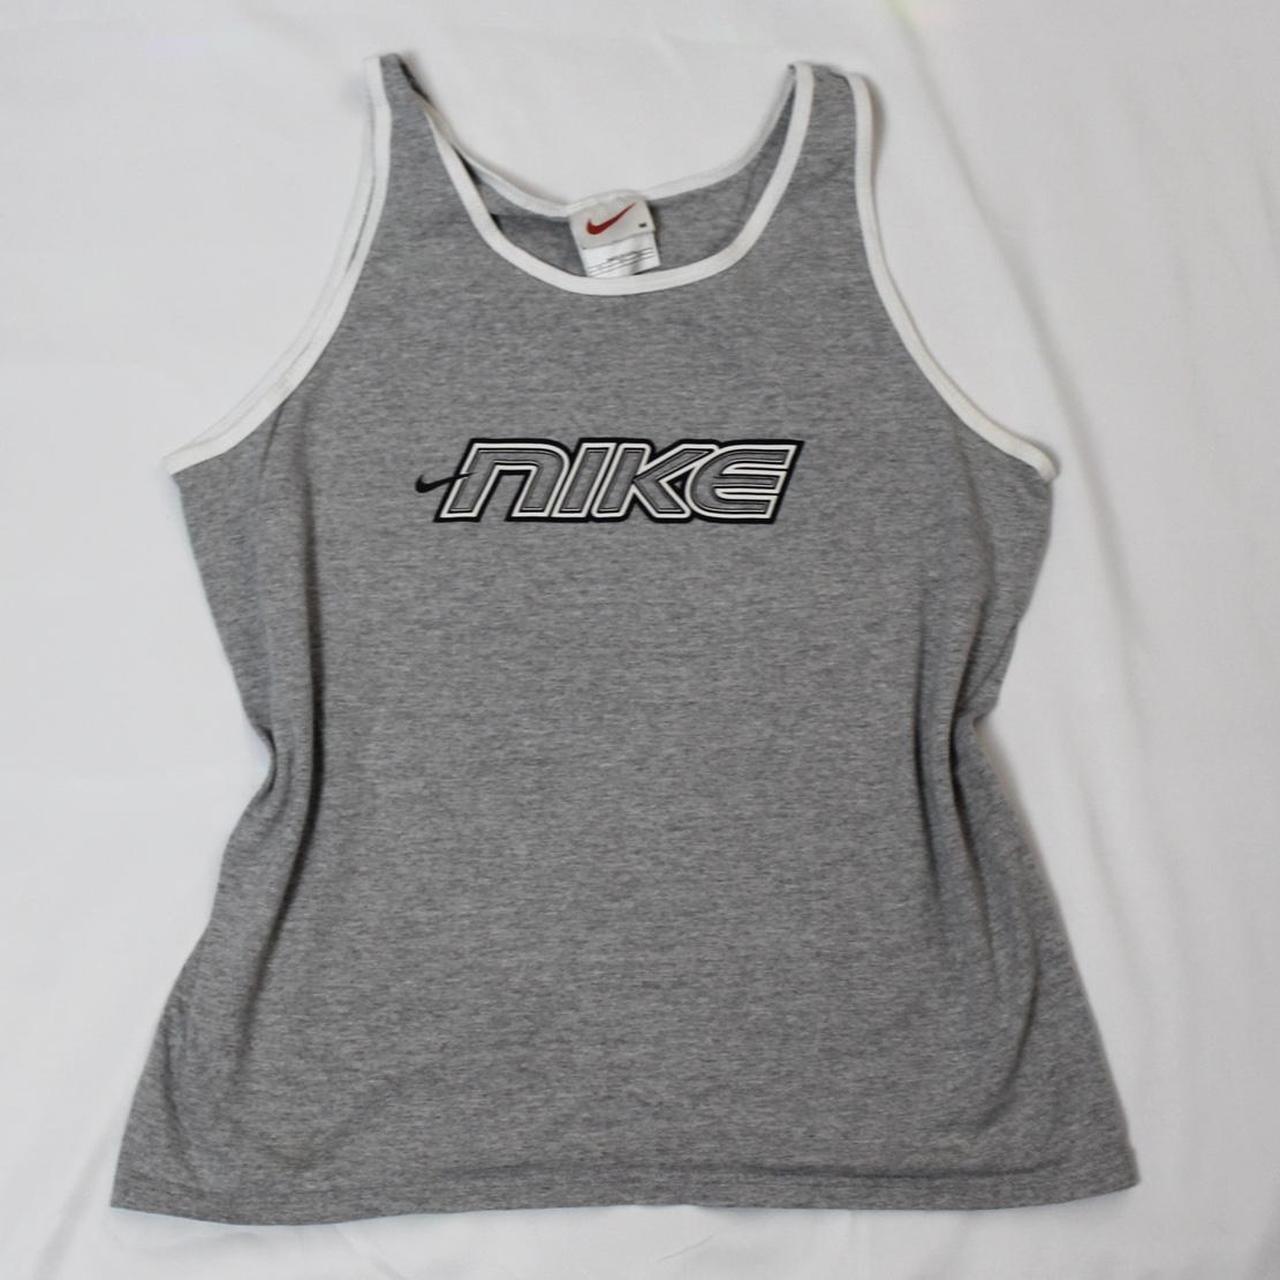 Women's Nike Tank Tops, Preowned & Secondhand